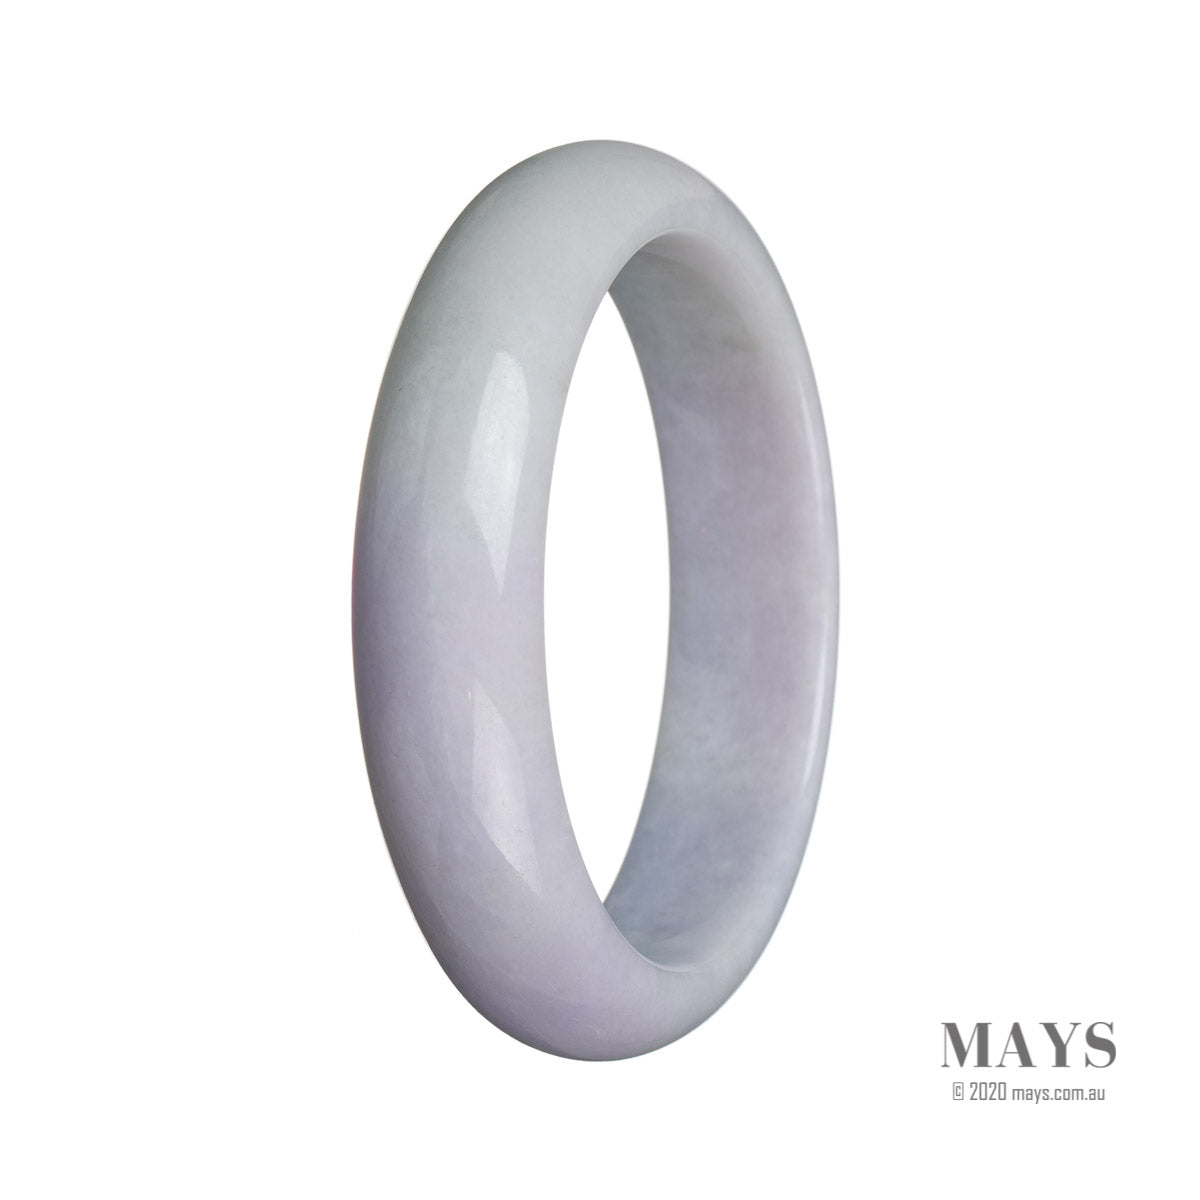 A lavender jade bangle bracelet with a half moon design, made from authentic Grade A jade.